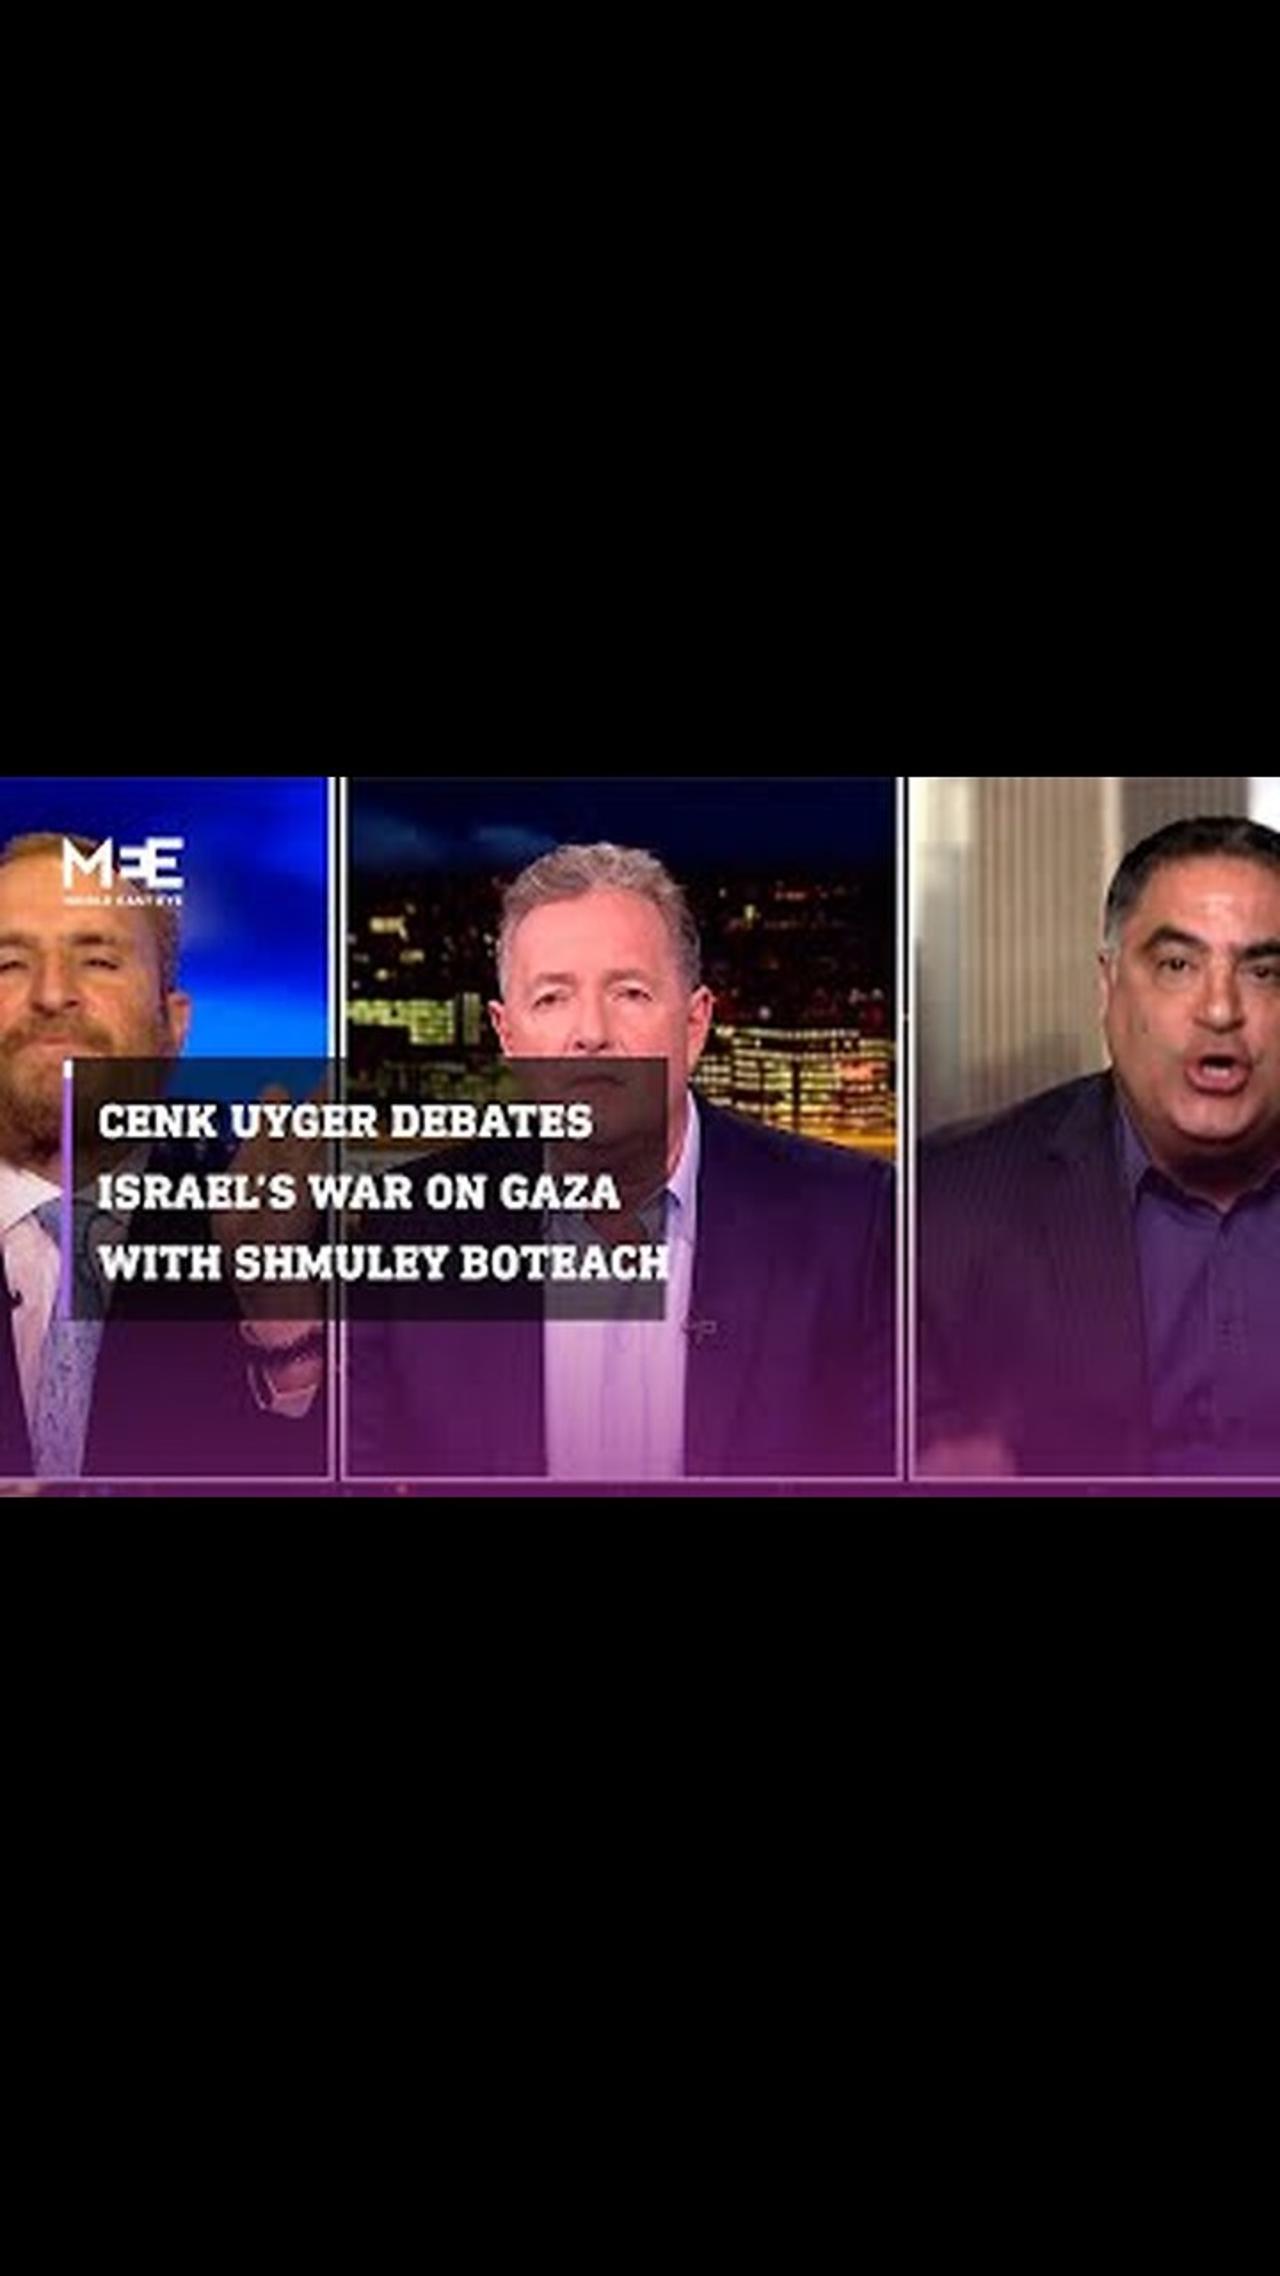 Cenk Uygur debates Israel’s planned invasion of Rafah with Shmuley Boteach on Piers Morgan show